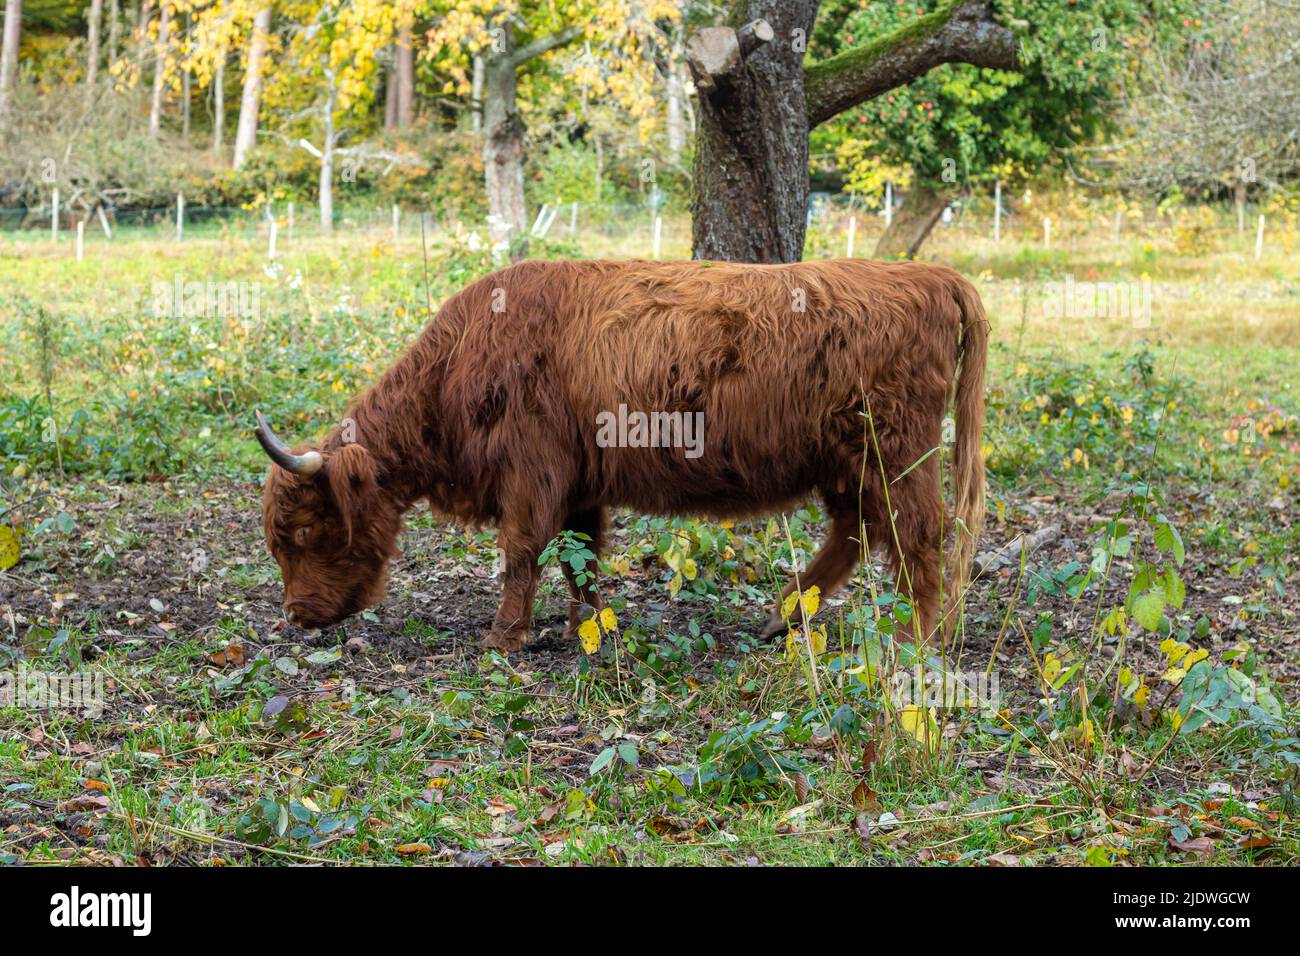 scottish highland cattle with brown fur cares for vegetation on a meadow in a nature reserve in southern germany Stock Photo